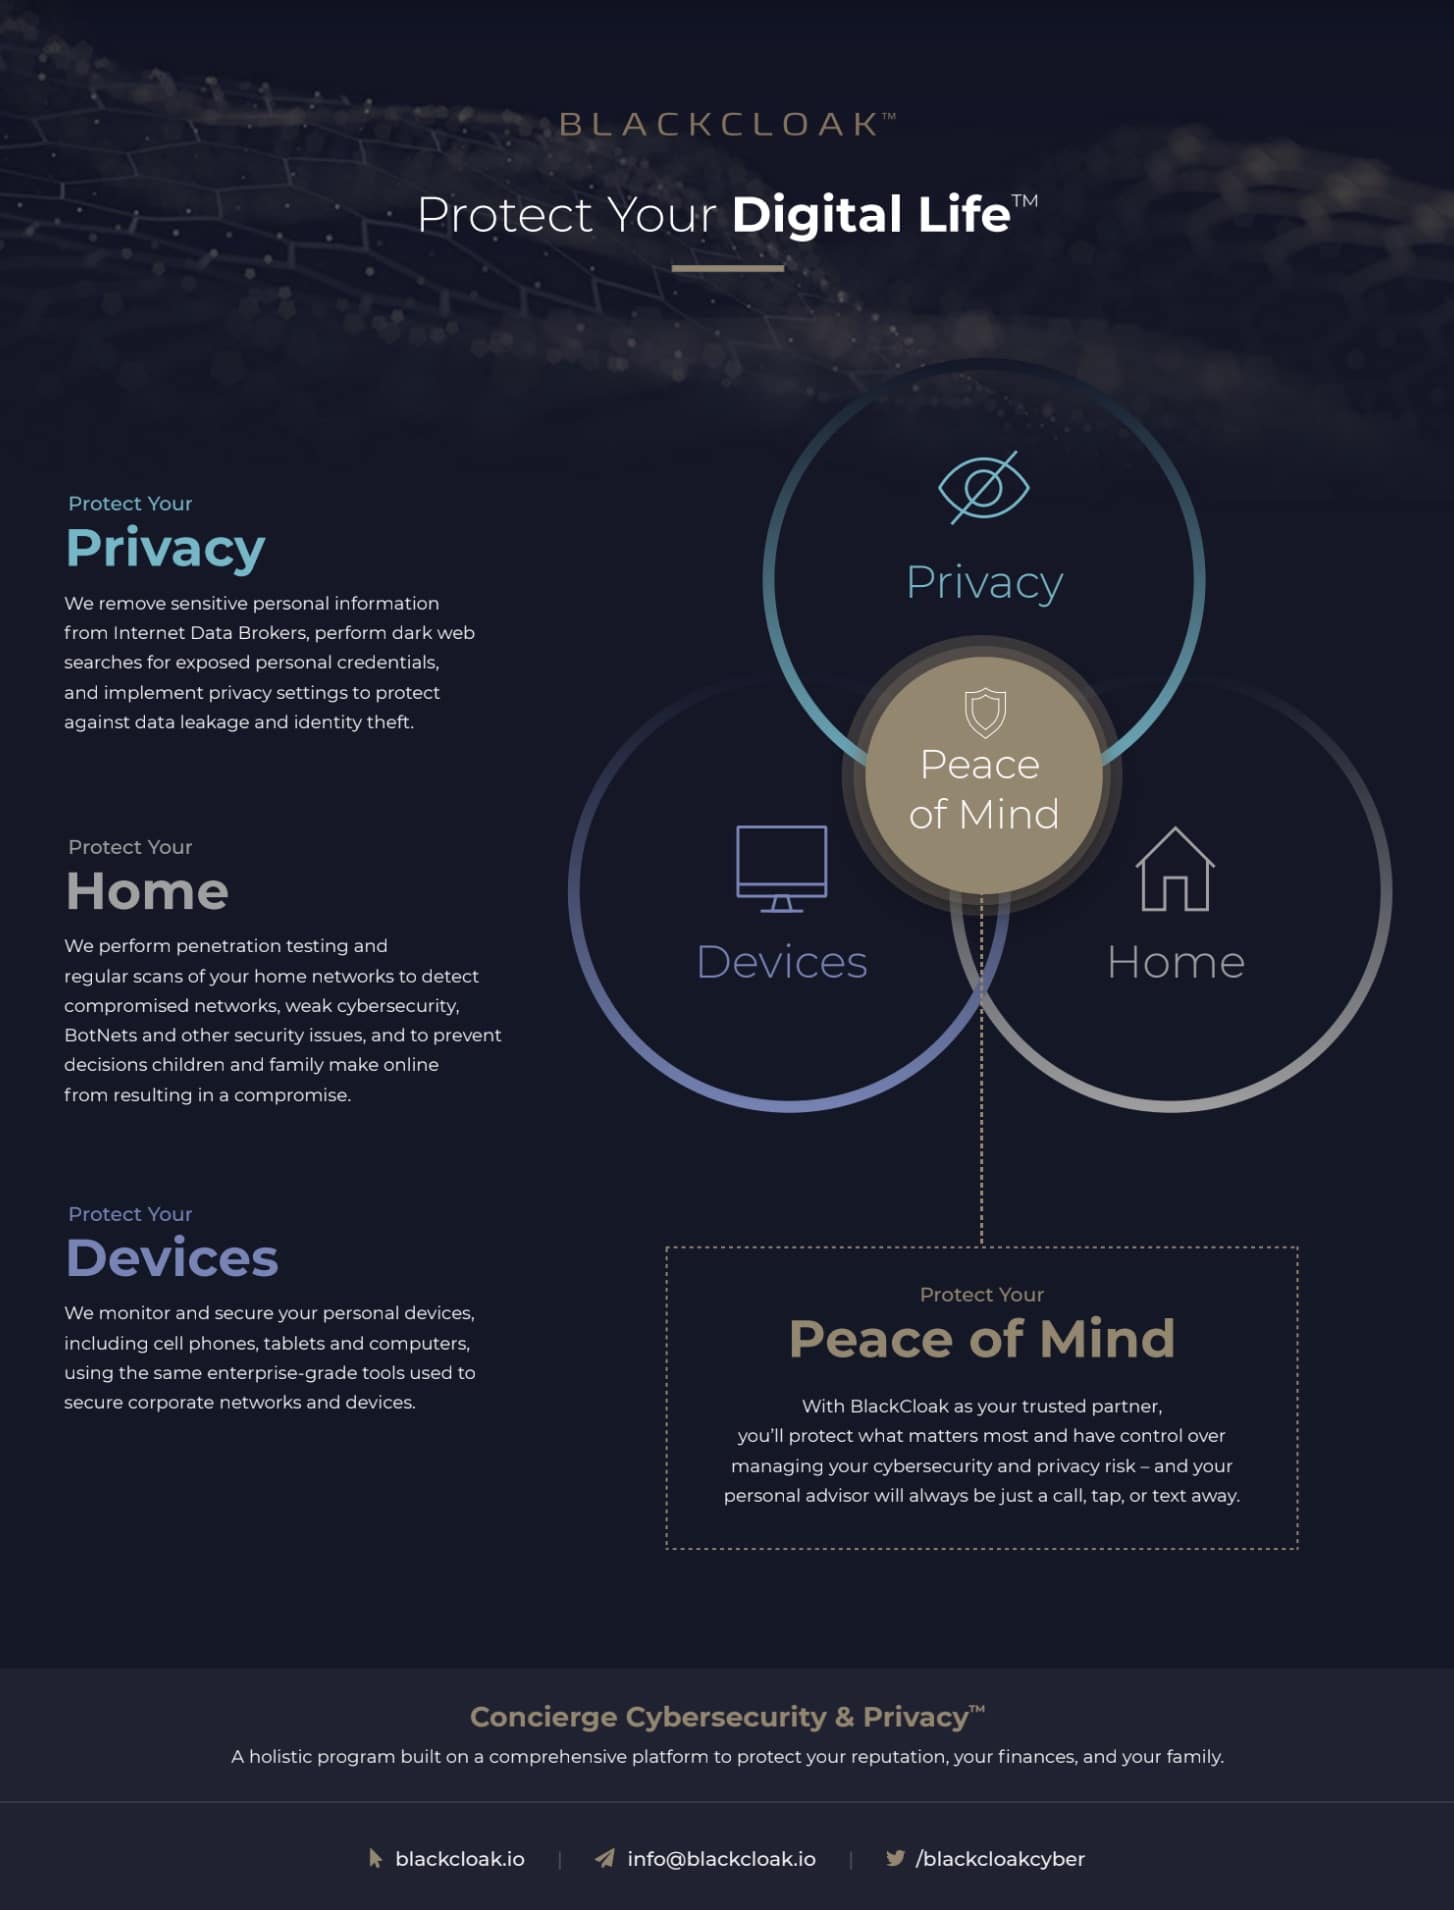 BlackCloak's concierge cybersecurity services for privacy, home network protection, and personal device protection